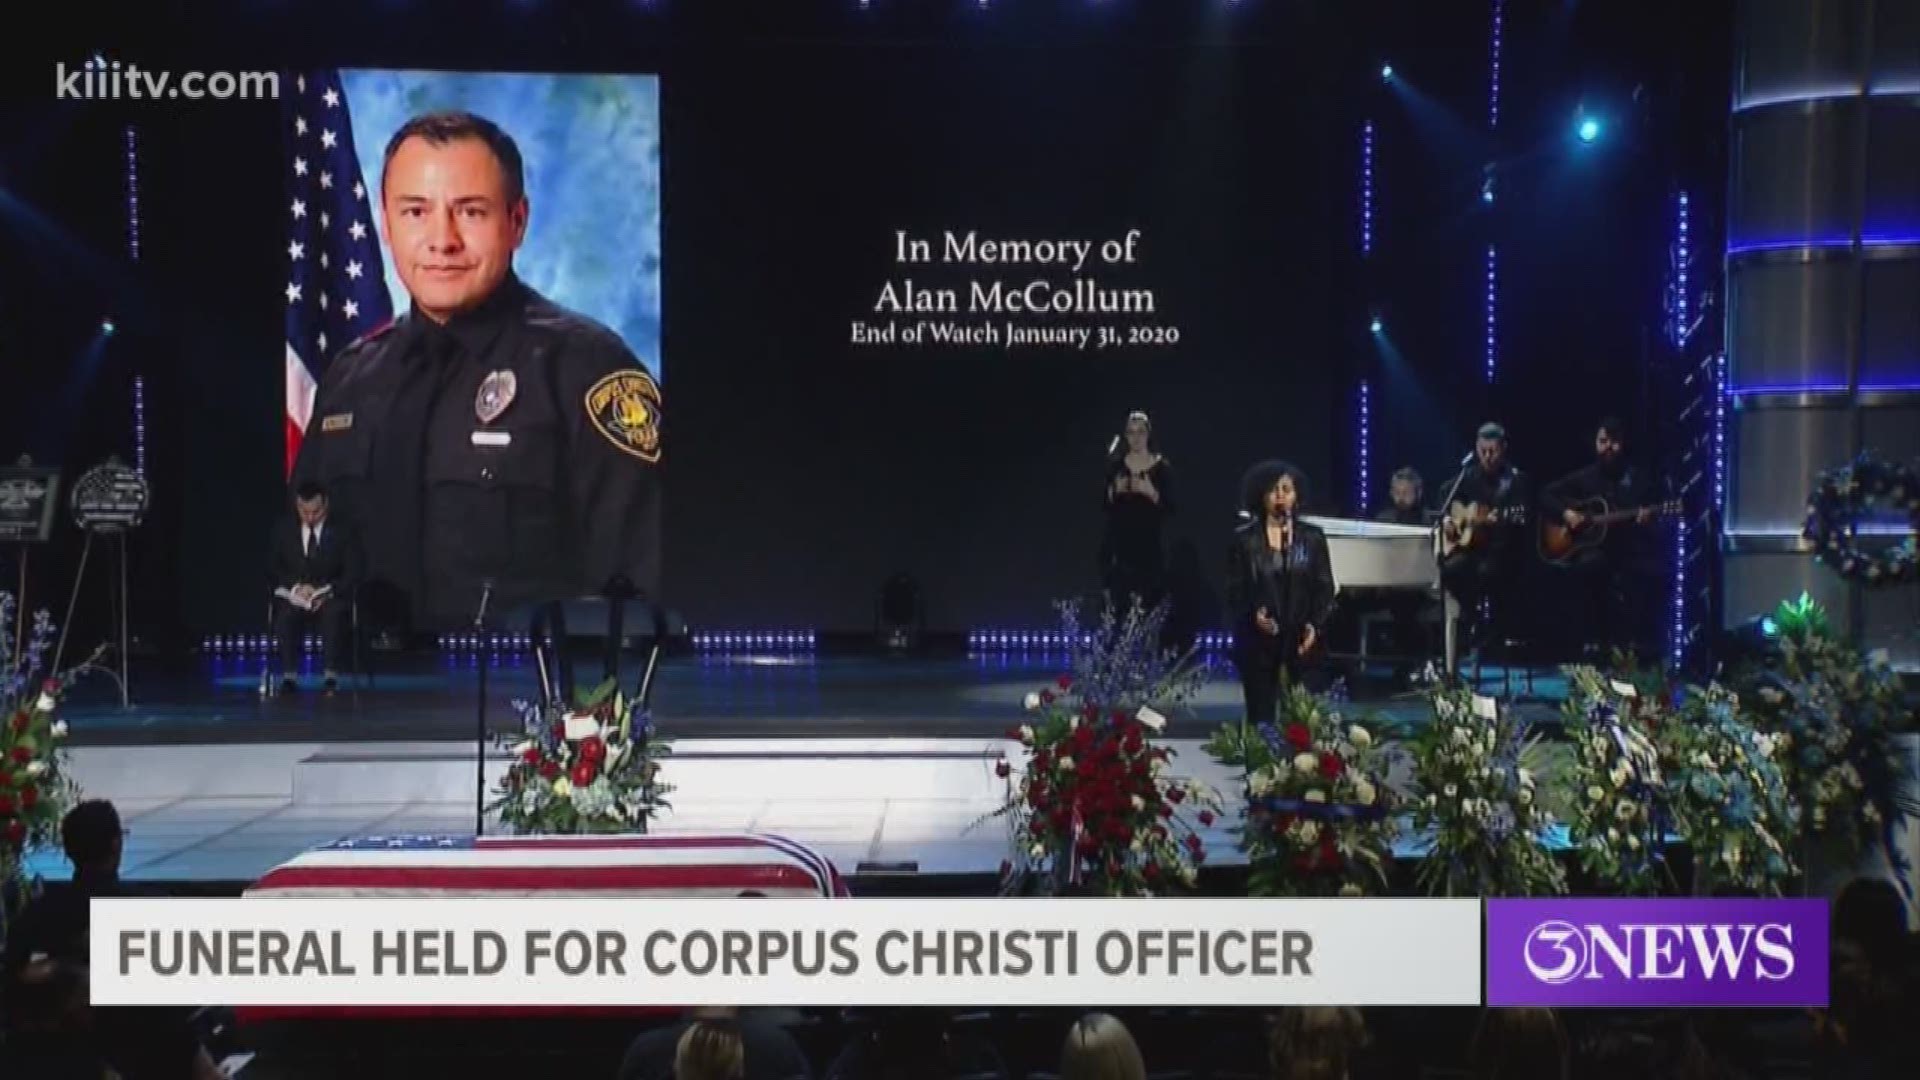 Police Chief Mike Markle also spoke at the funeral and he said Officer McCollum was not a hero because of how he died, but because of the life, he lived.